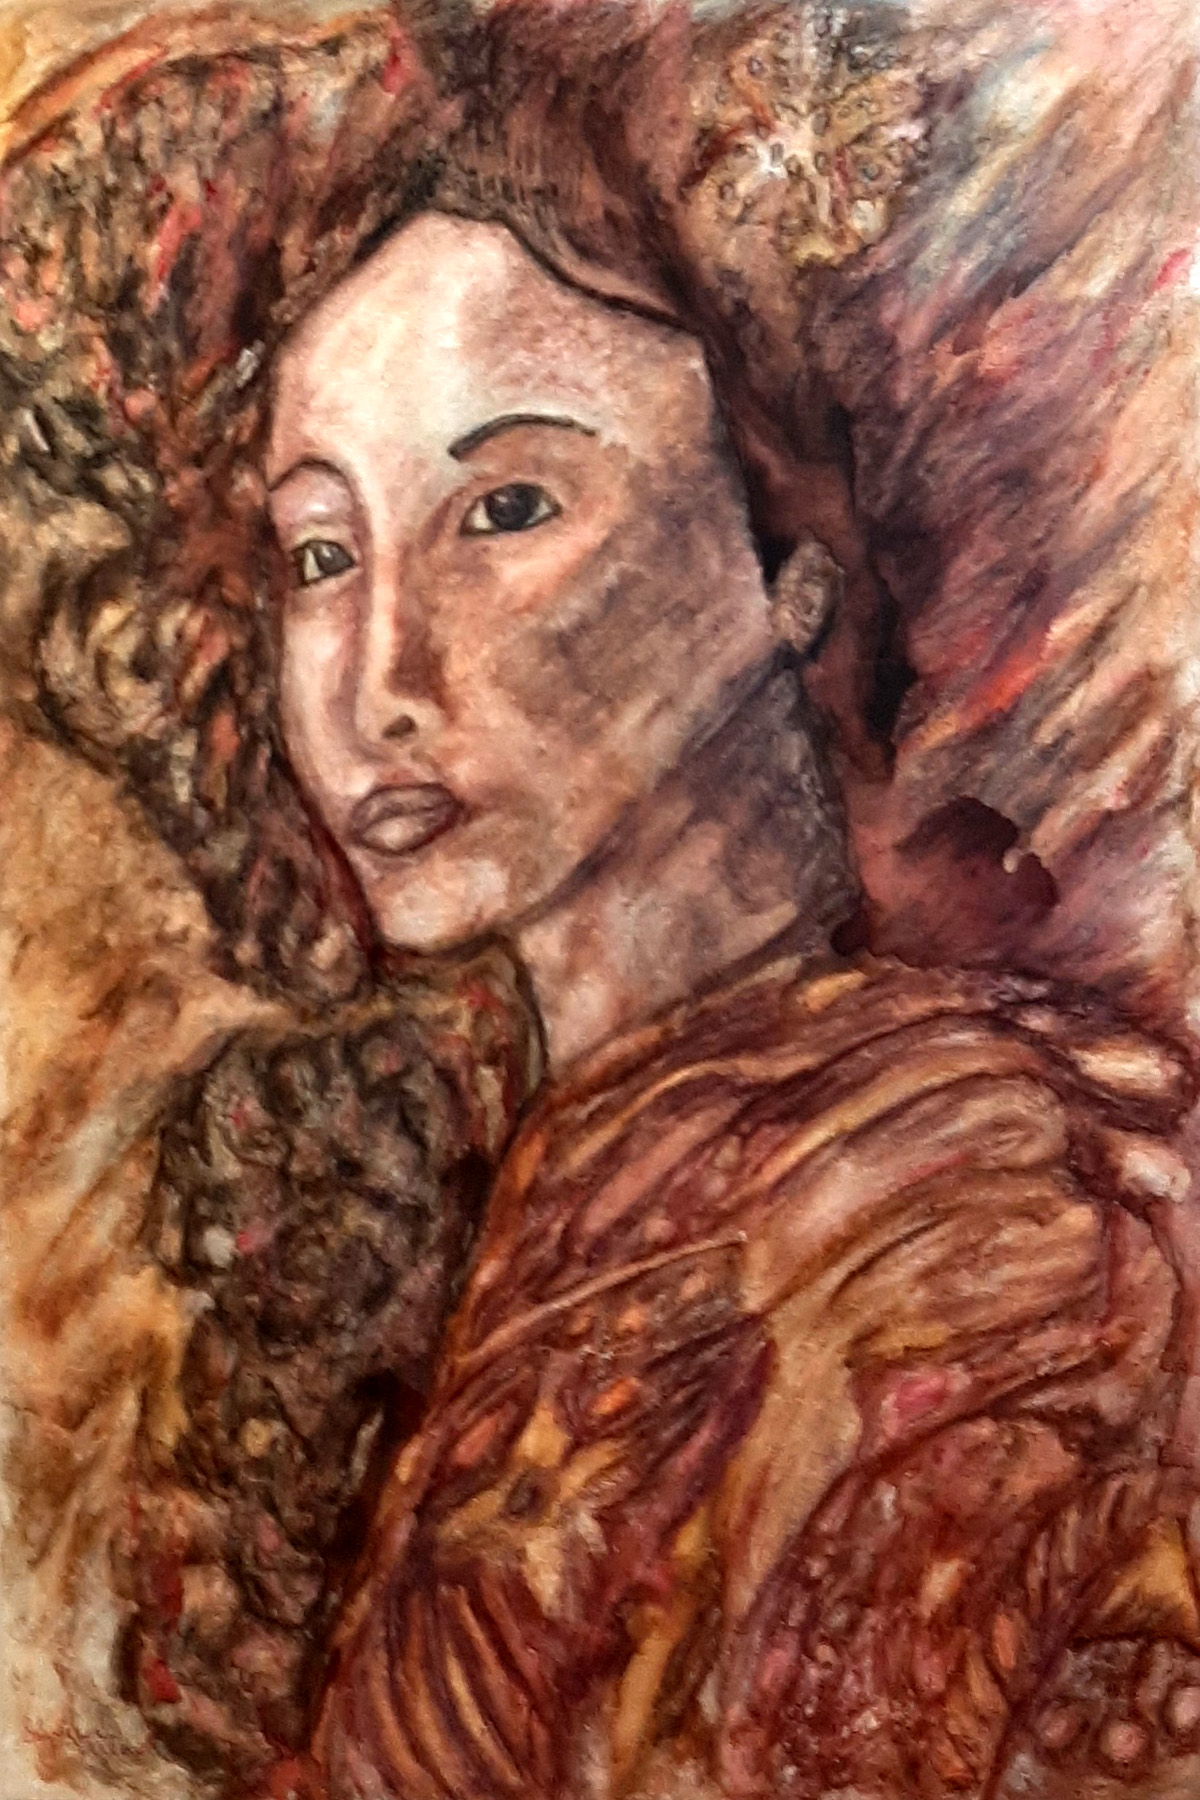 Stephen Mead, 'Shima', 1998, original Watercolor, 18 x 24  inches. Artwork description: 2307 From the award- winning series Heroines Unlikely, incorporated into the book Selected Works, available through Amazon or Lulu.  com. ...